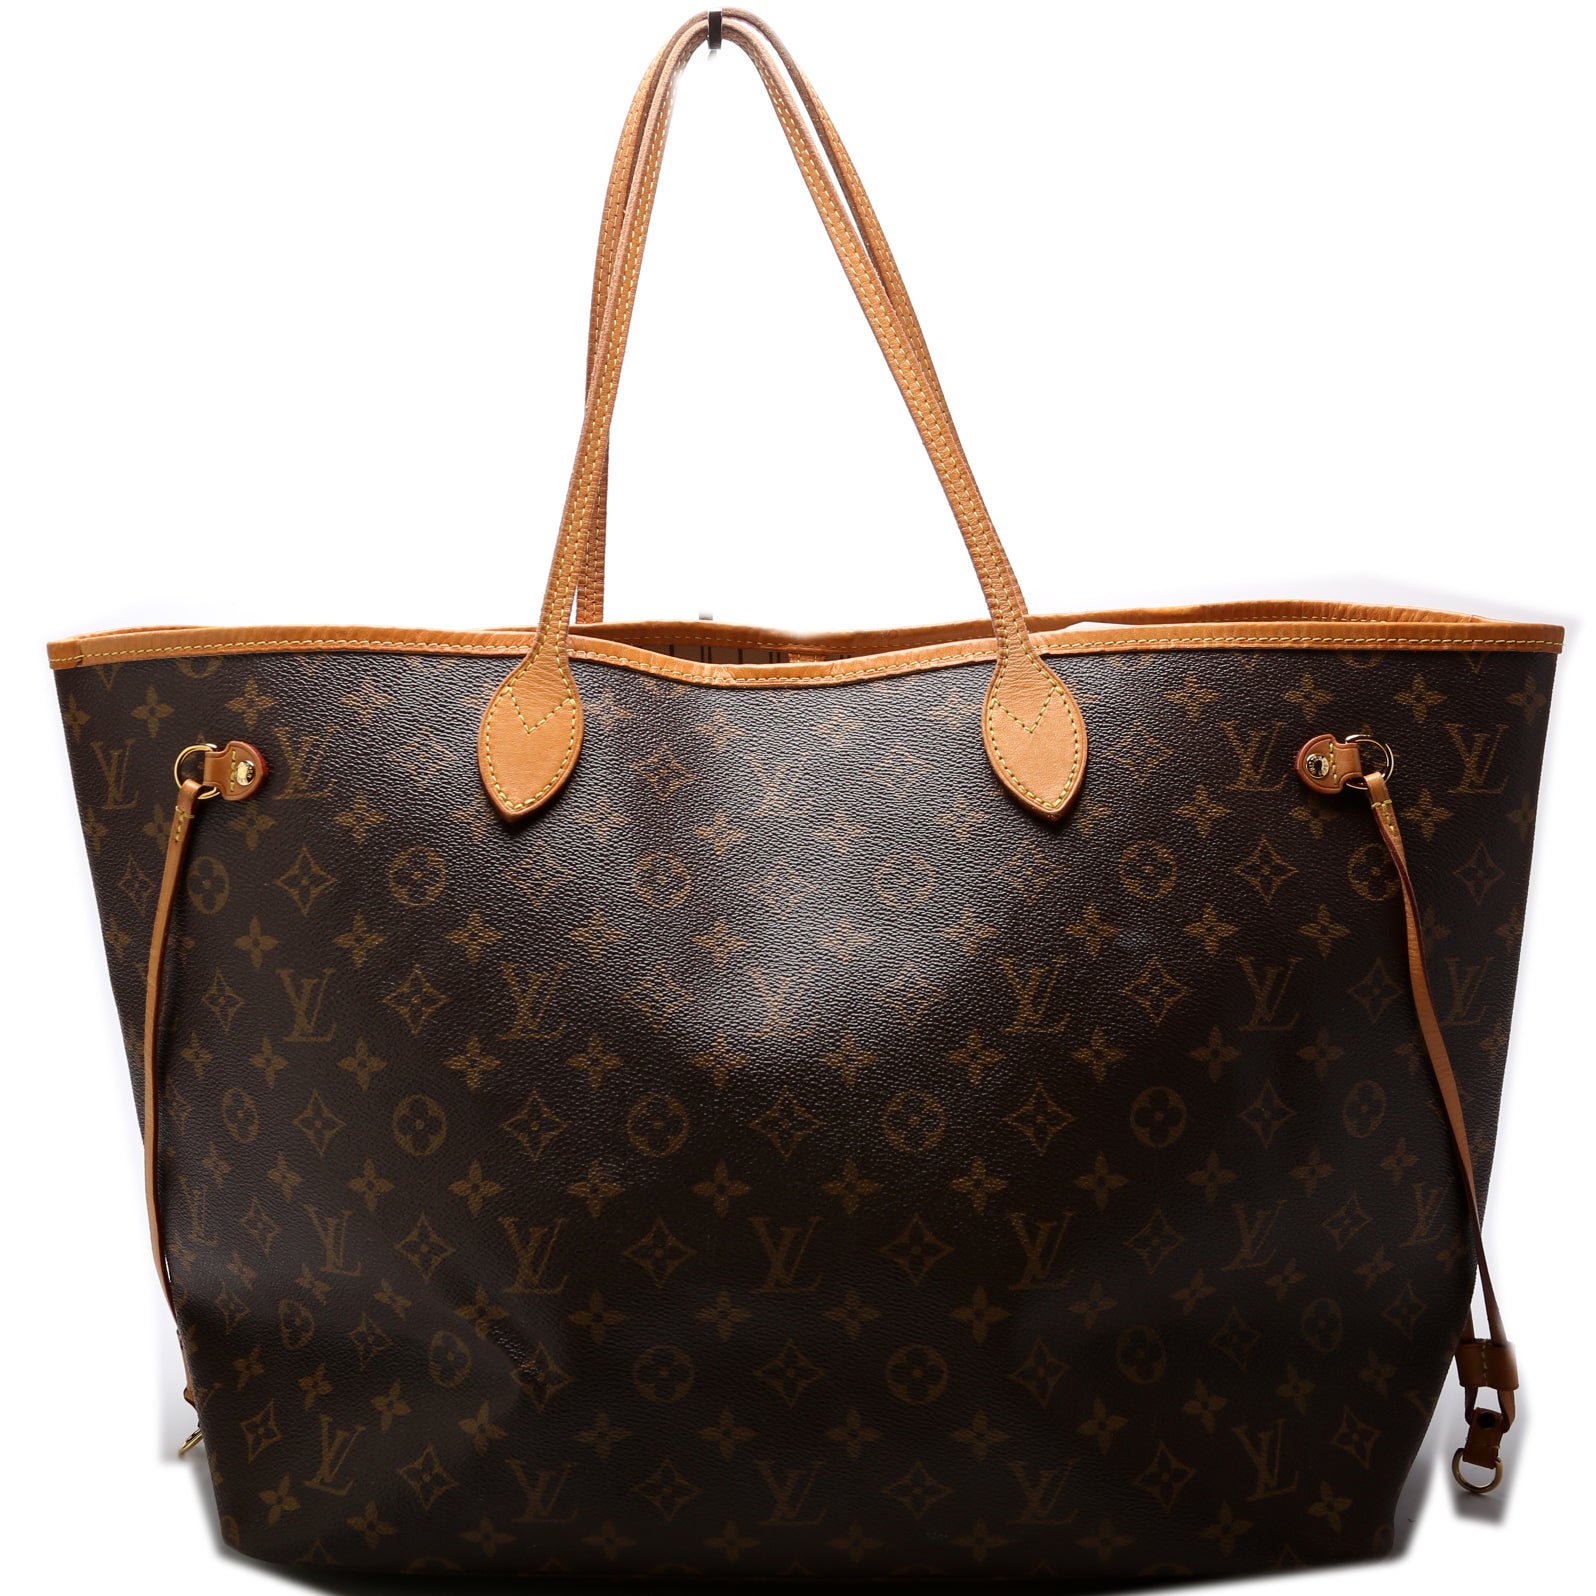 Neverfull GM Tote bag in Monogram Coated Canvas, Light Gold Hardware